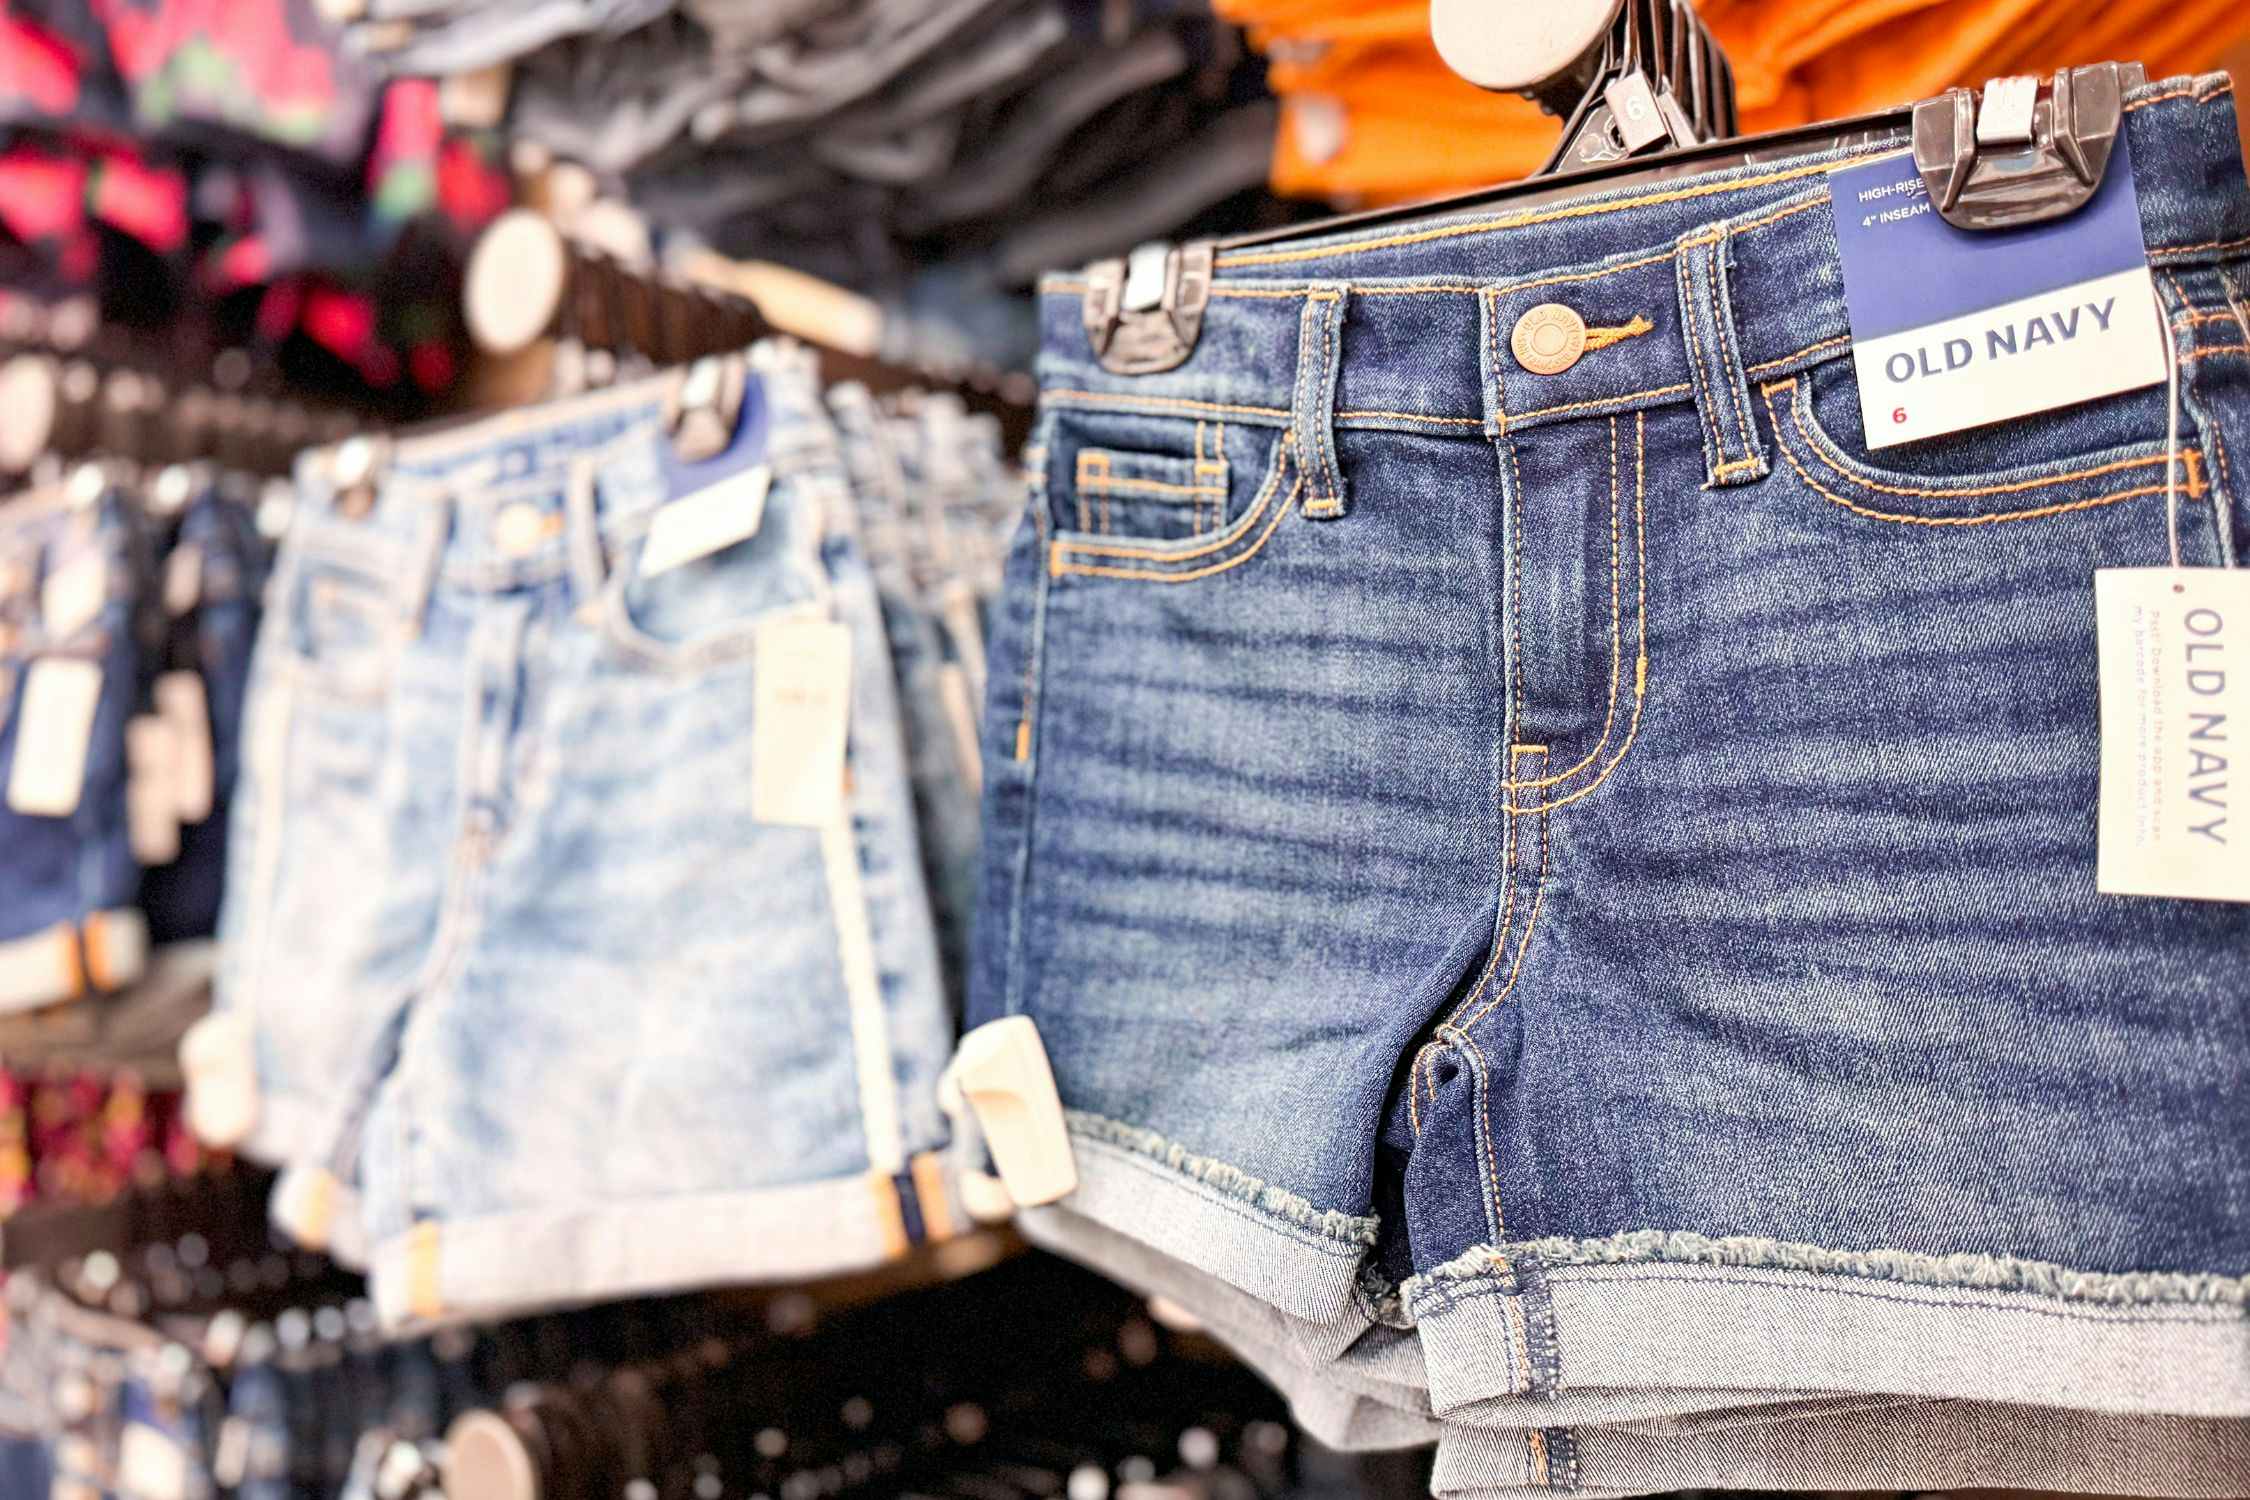 Today Only at Old Navy: $12 Denim Shorts and More Styles for the Family